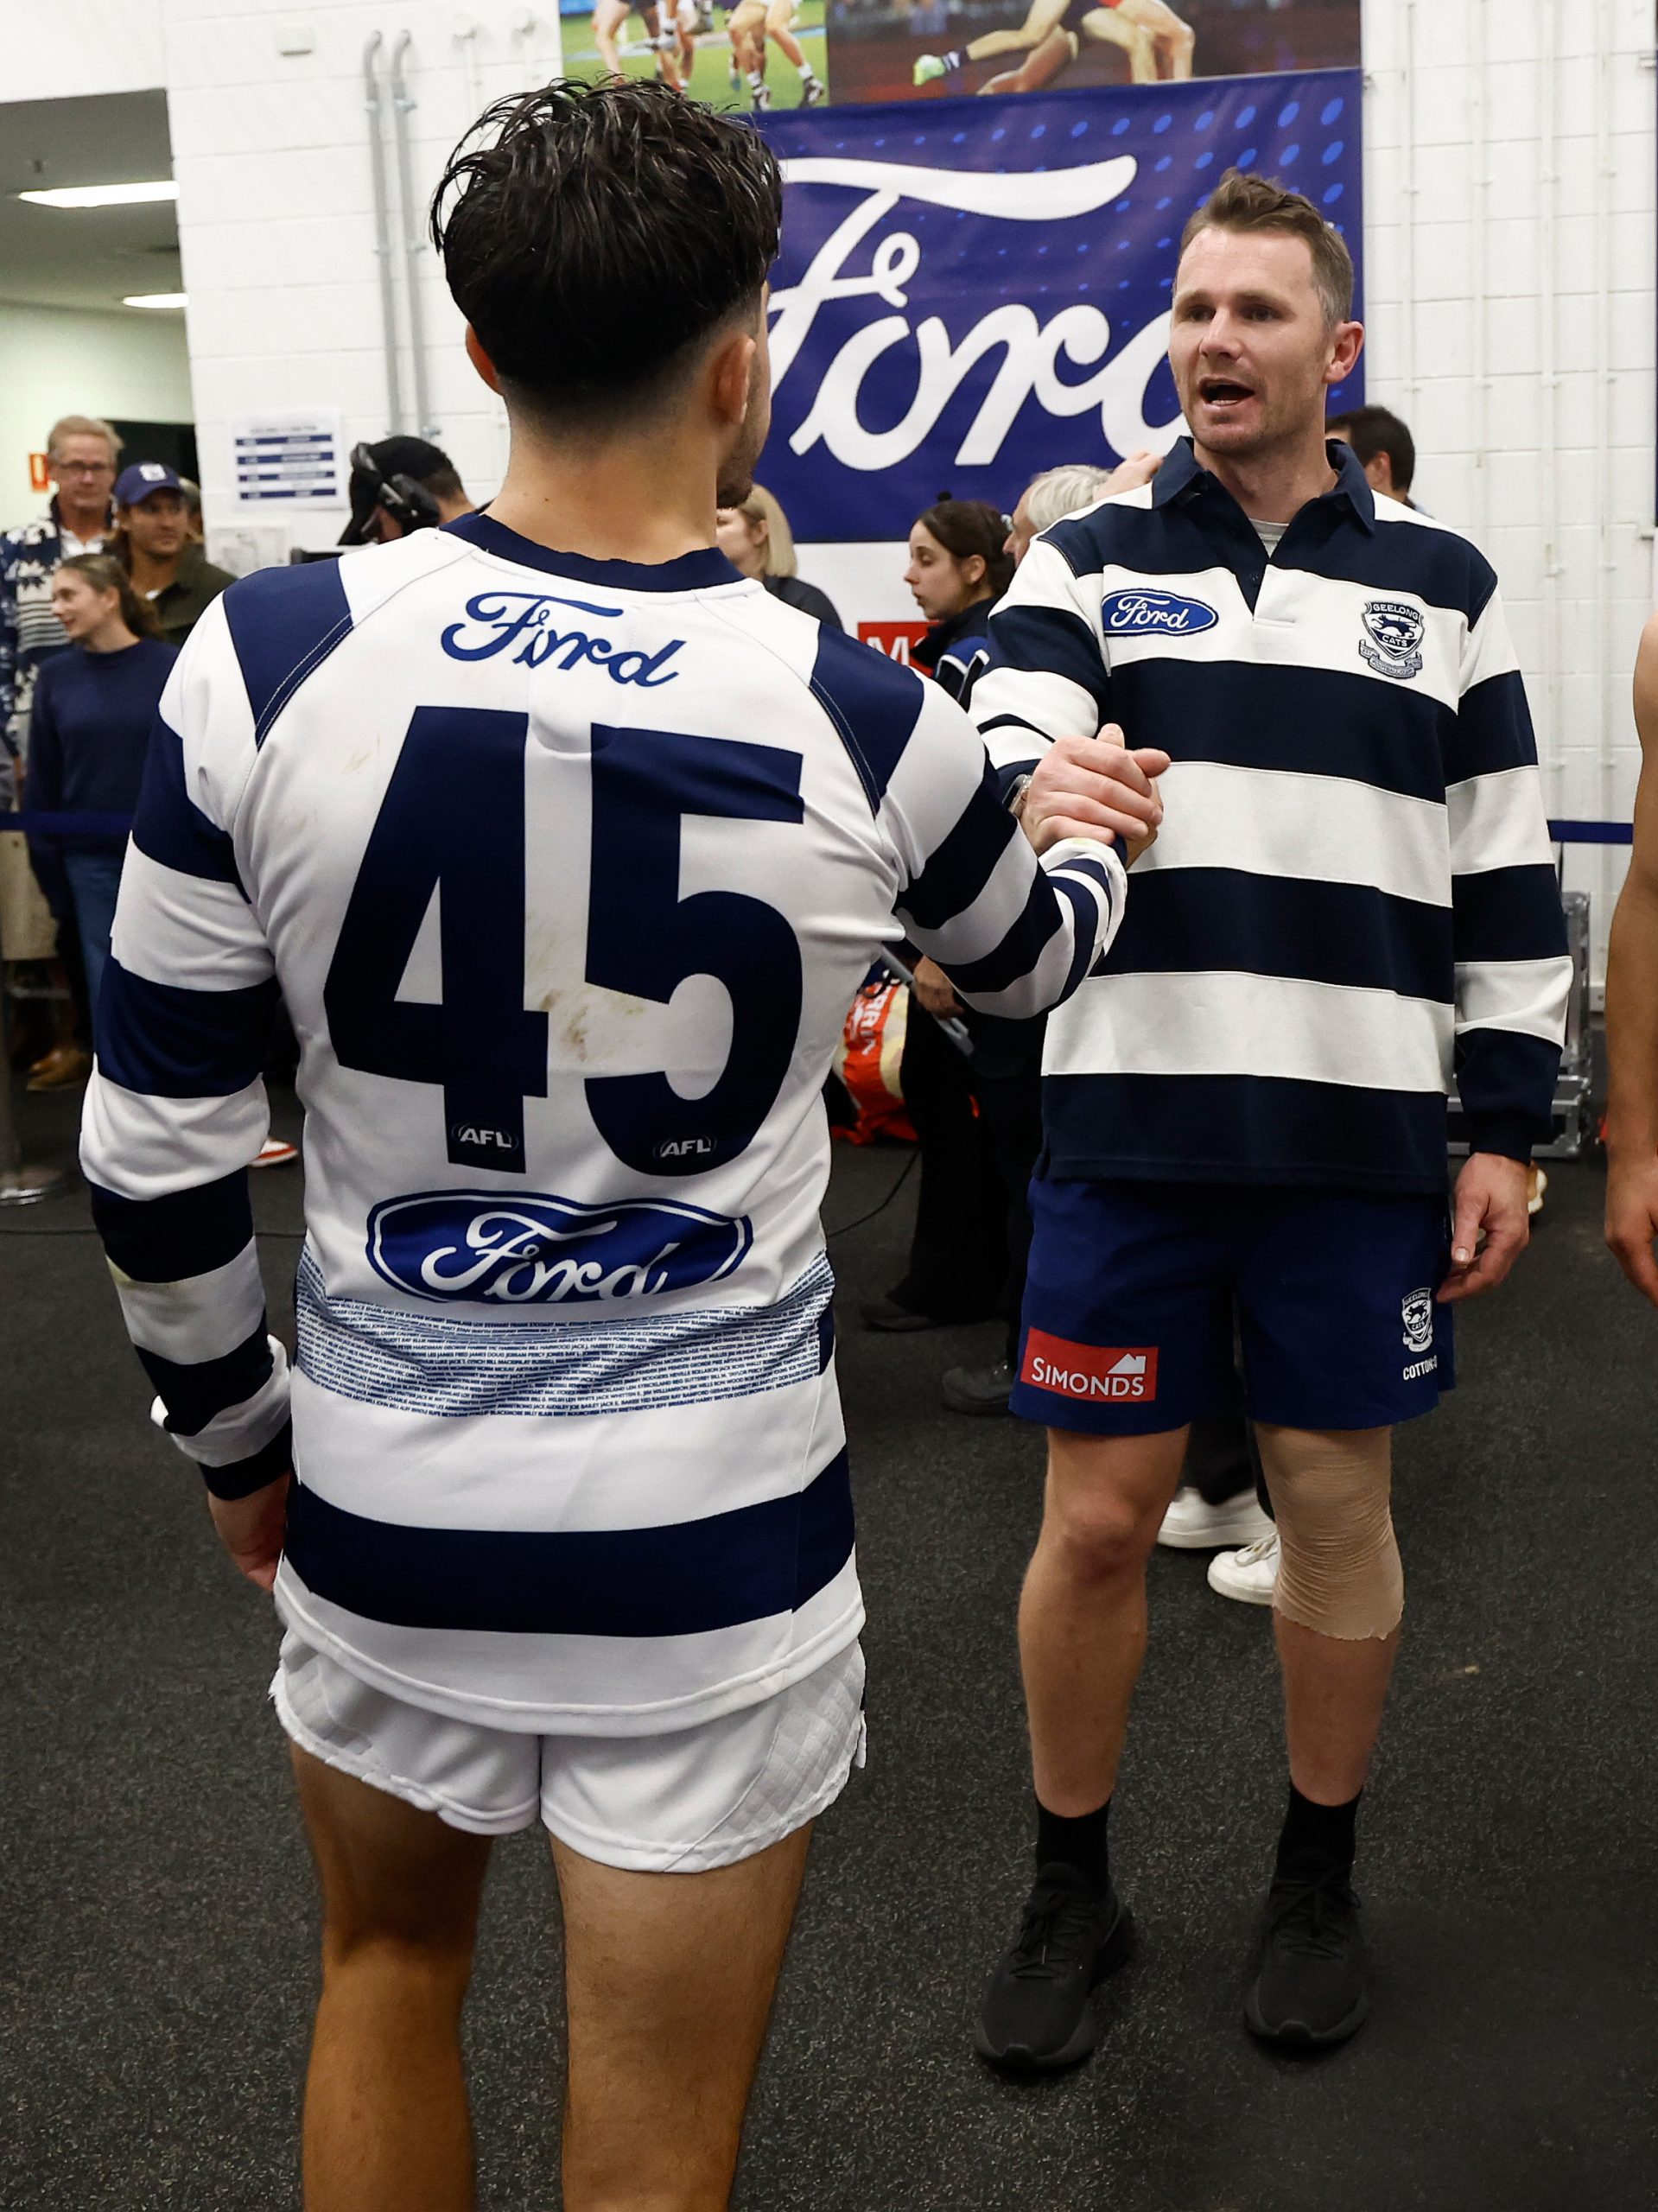 Dangerfield was all smiles post match.